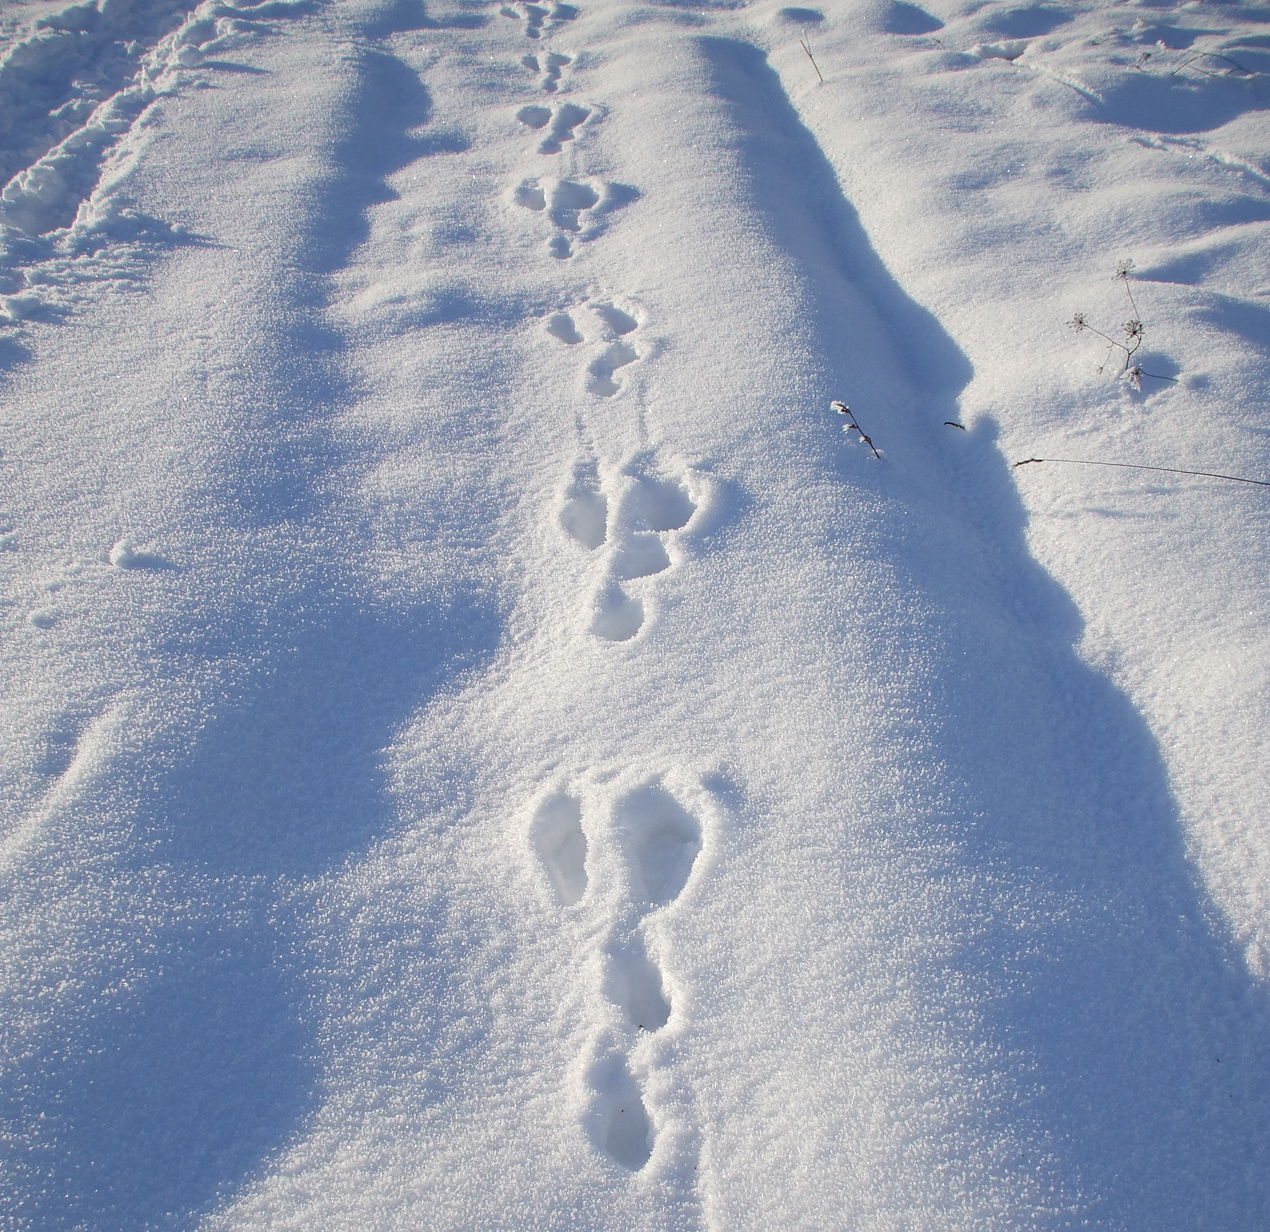 Animal Tracking Quiz, Question 6 - Can you identify this animal track?